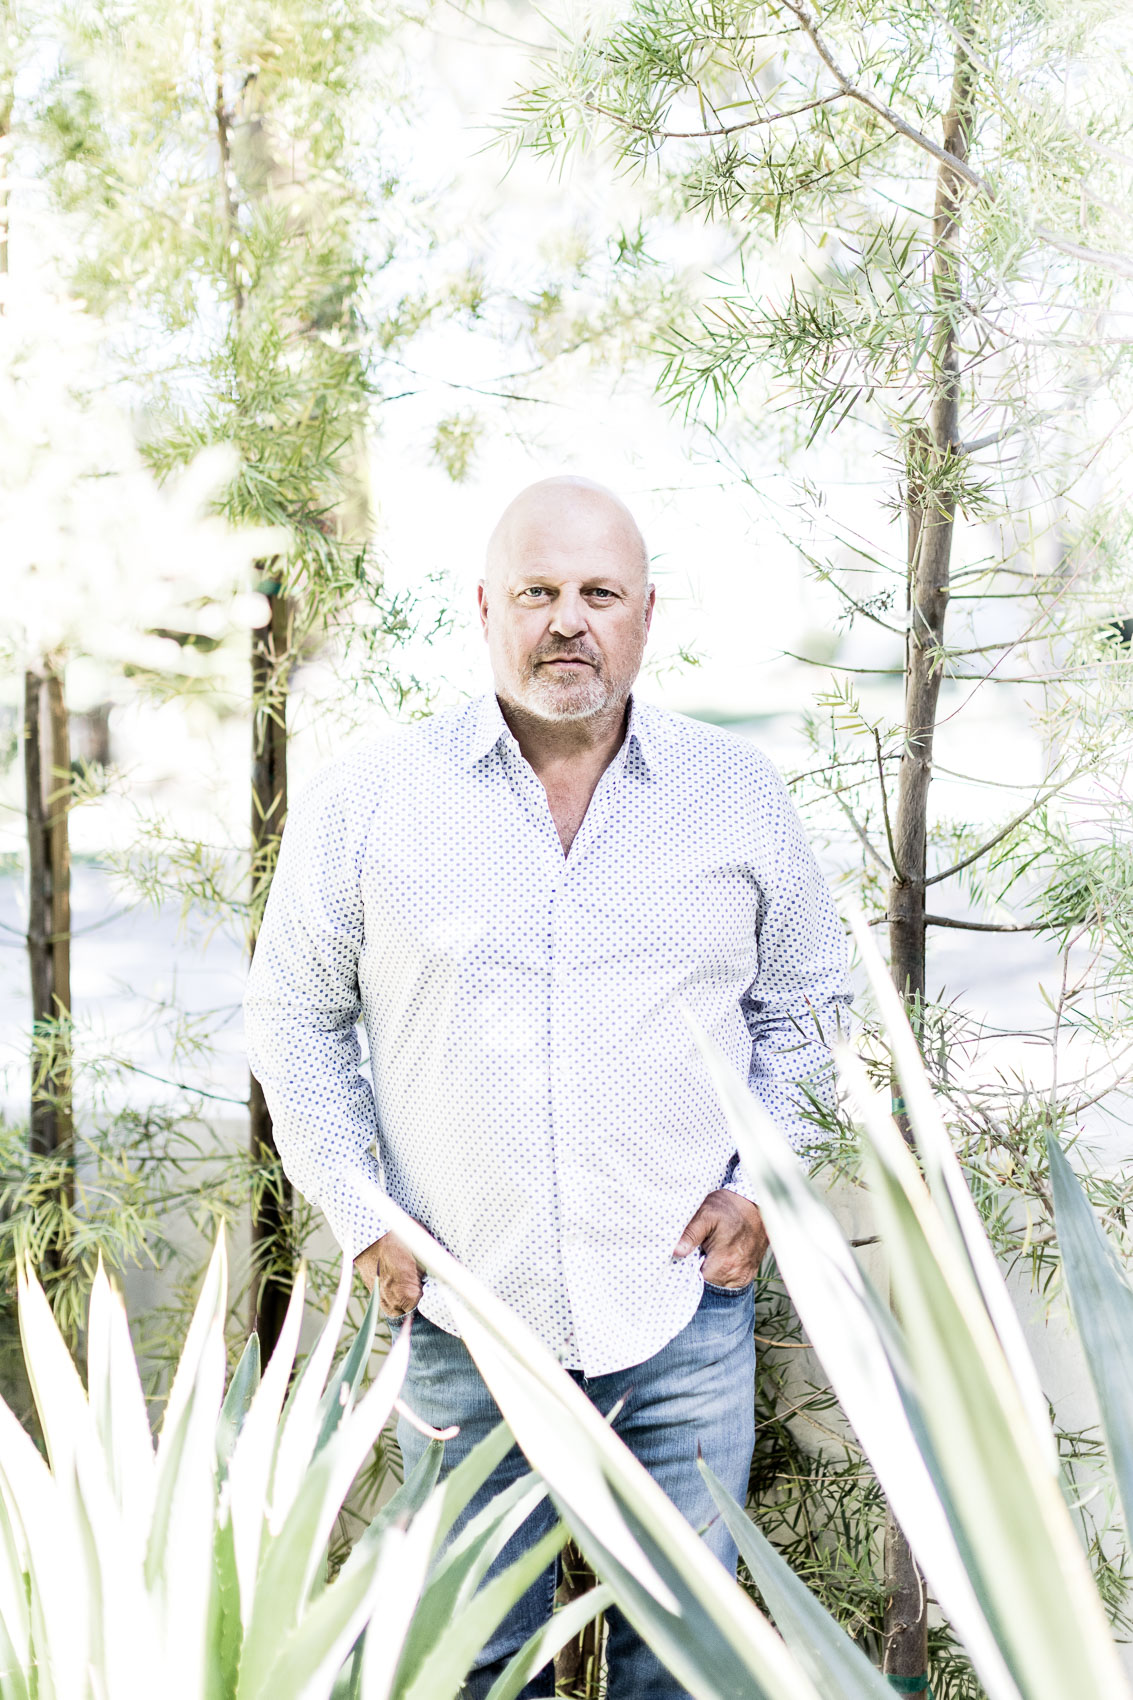 Michael Chiklis, actor, producer & director | Los Angeles | Editorial and Commercial Photographer Patrick Strattner